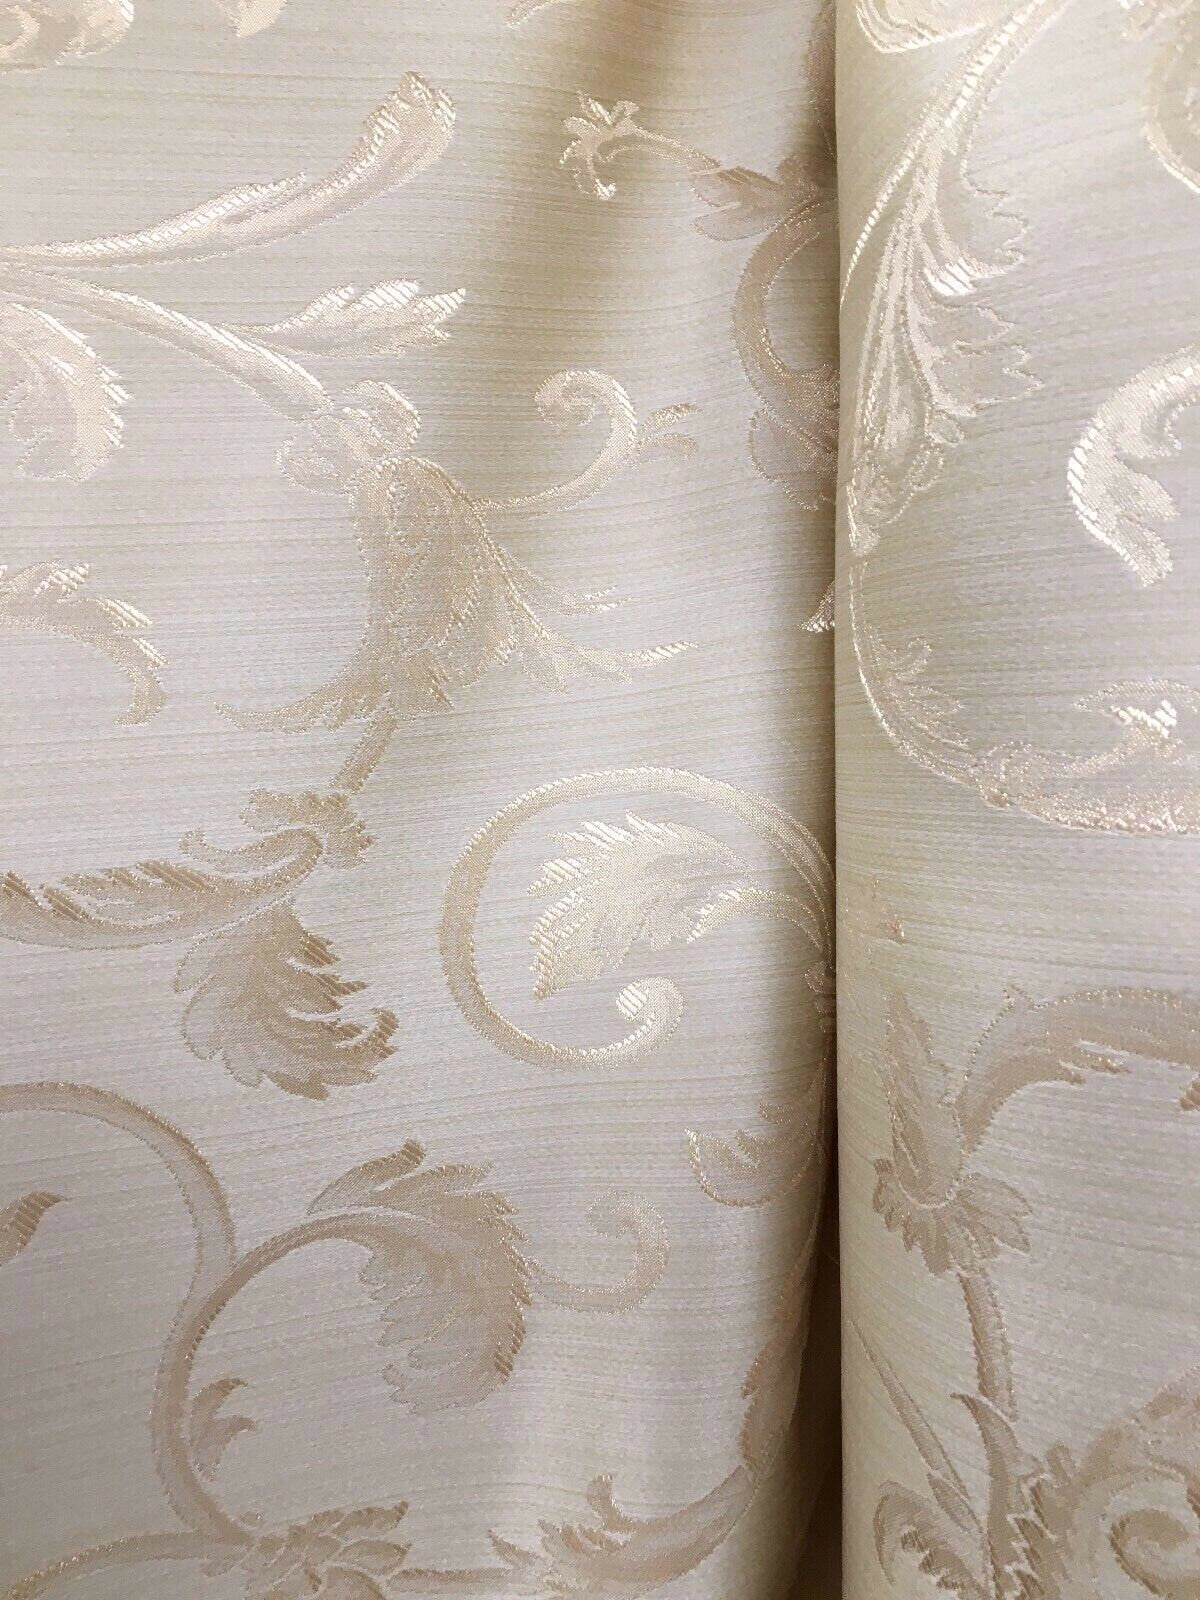 CHAMPAGNE Brocade Flower Floral Upholstery Drapery Fabric (110 in.) Sold By The Yard